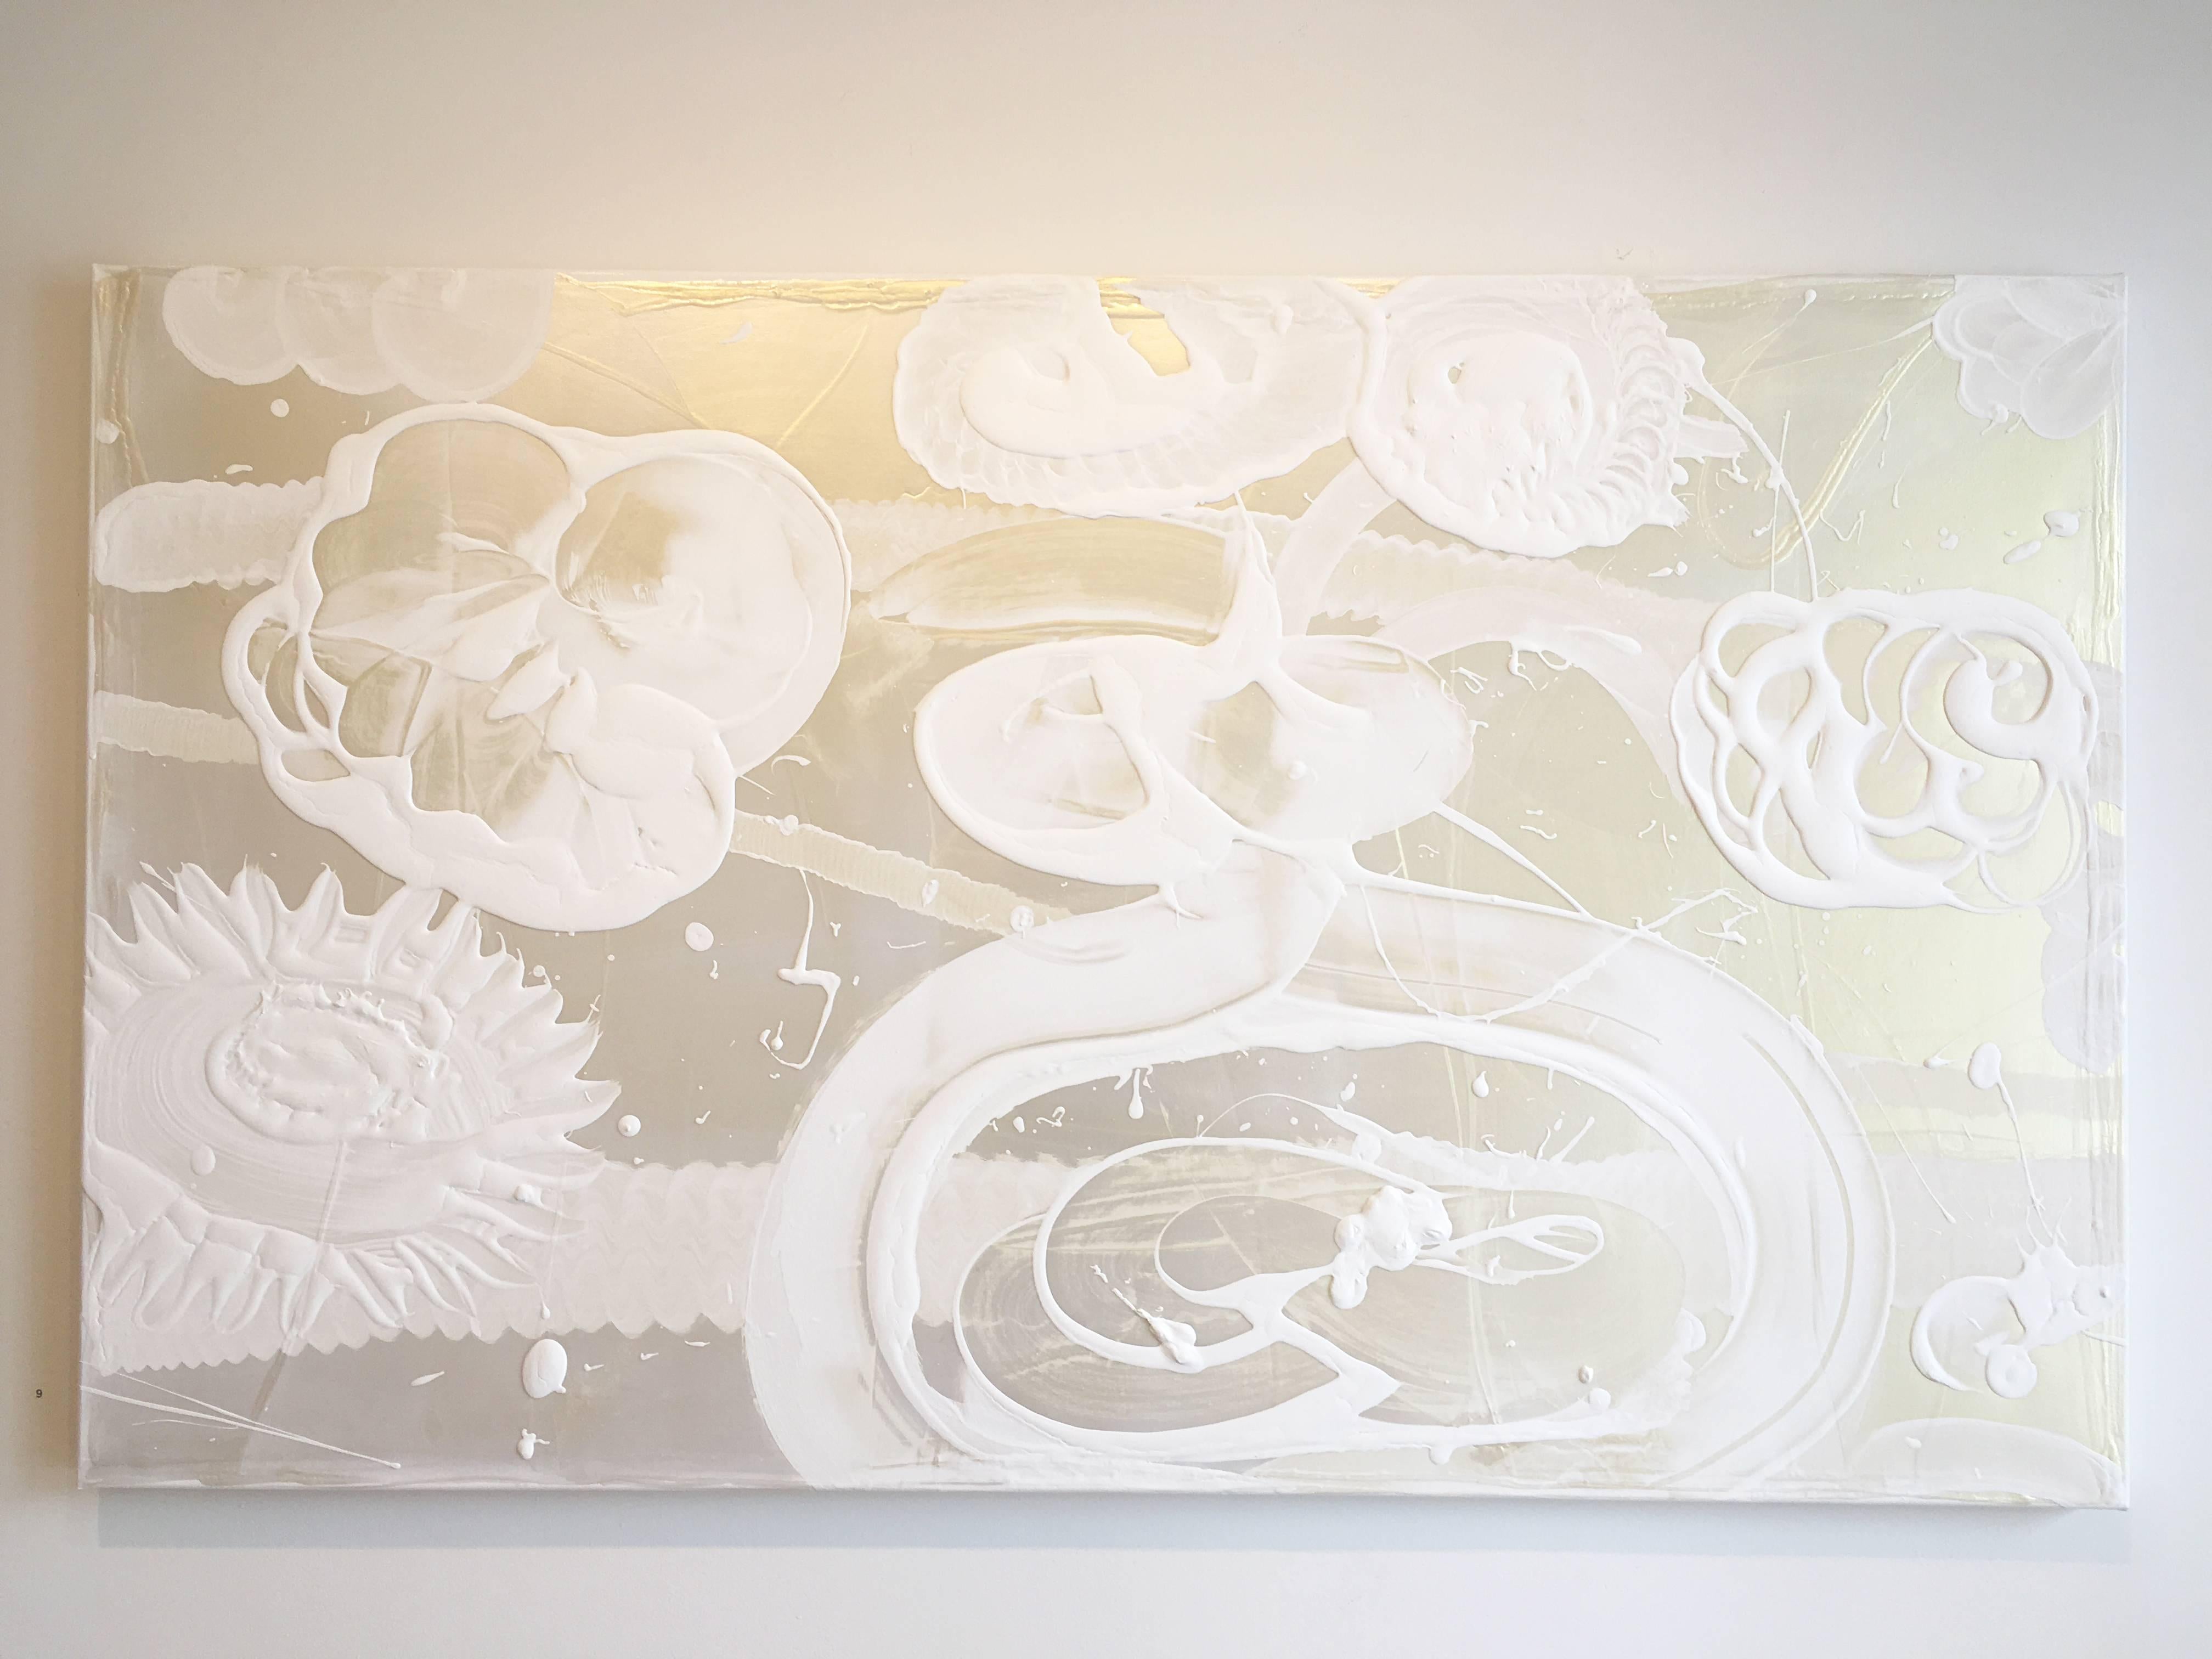 “Whistler” by Catherine Howe, 2017. Acrylic and interference mica pigment and resin on canvas, 36 x 60 inches. Howe's abstracted still life florals are painted with a matte white gesso mixture that is applied with thick, sweeping, gestural